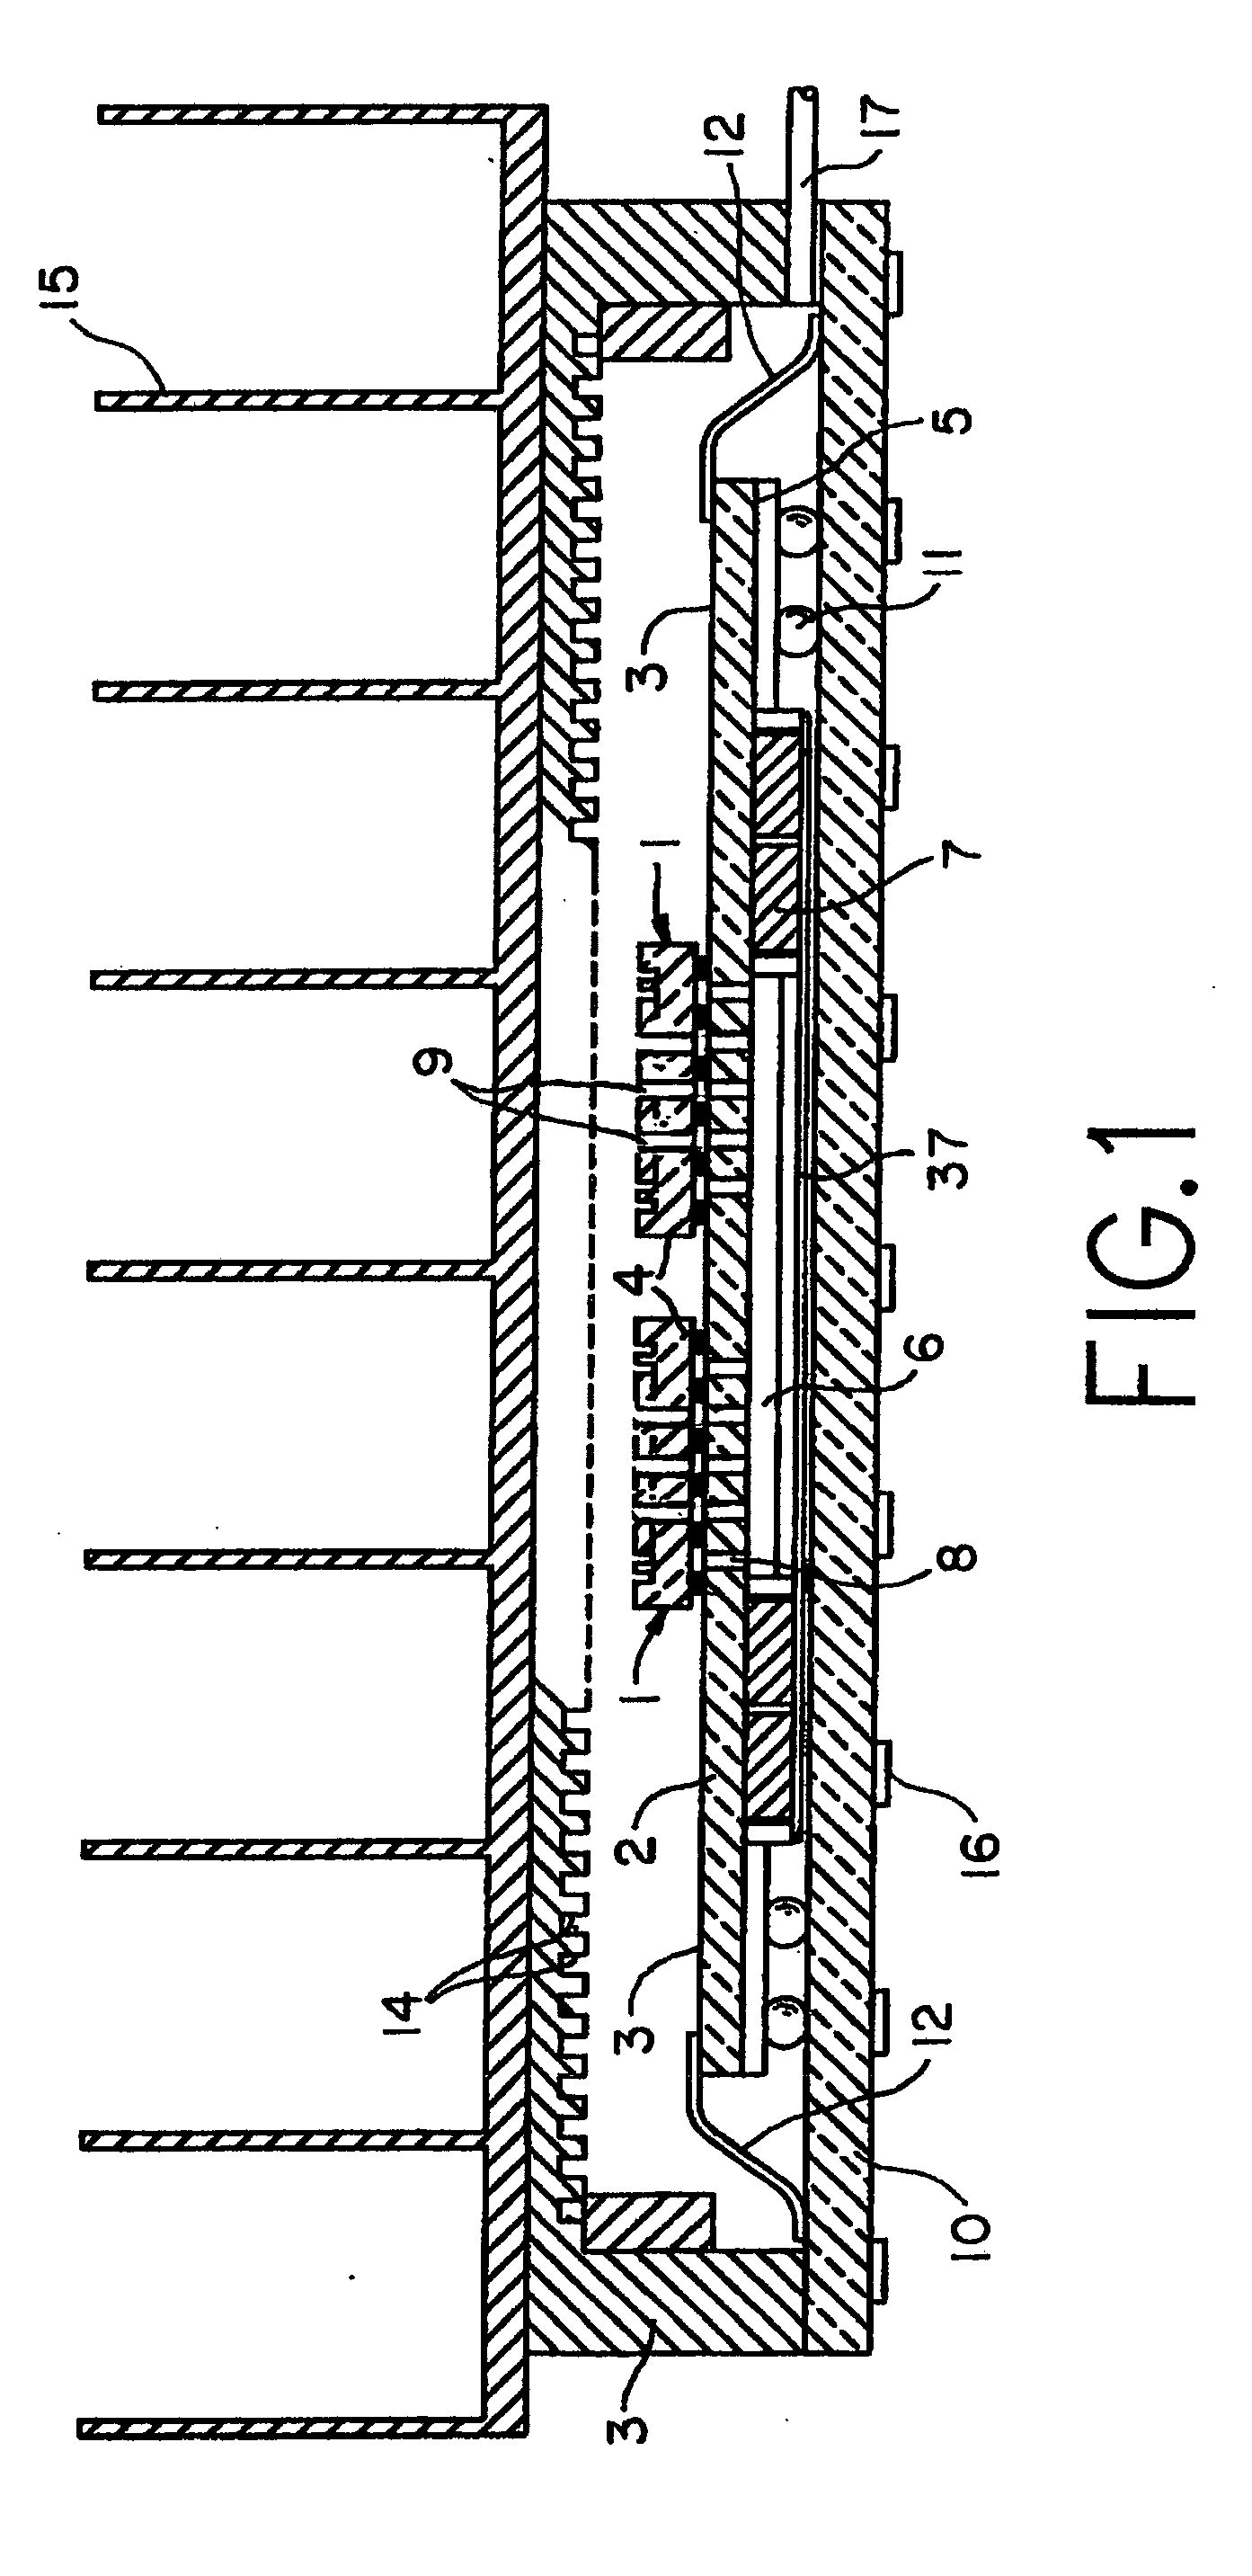 Chip packaging module with active cooling mechanisms